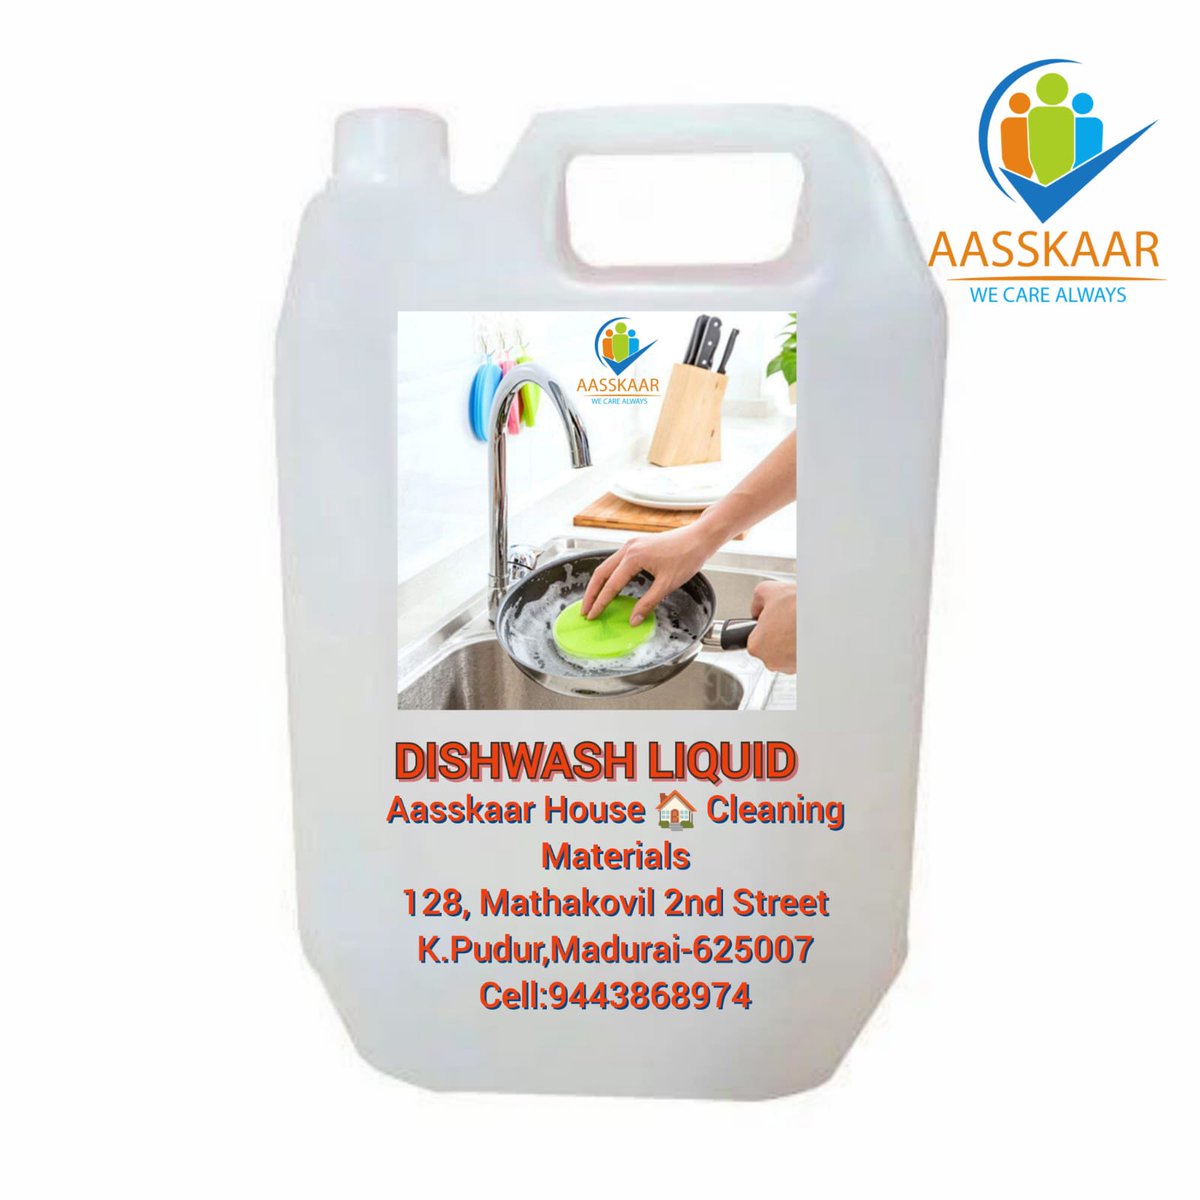 Now you won't leave your dishes unclean. EC WASH dishwasher round is not a dishwashing bar, it is a wizard. Cleans every hook and corner of the utensil and maintains freshness. ☃️☃️☃️

#aasskaar #ecwash #cleaning #clean #Washing #dishwash #Residues #Liquid #Dishsoap #Dishwasher